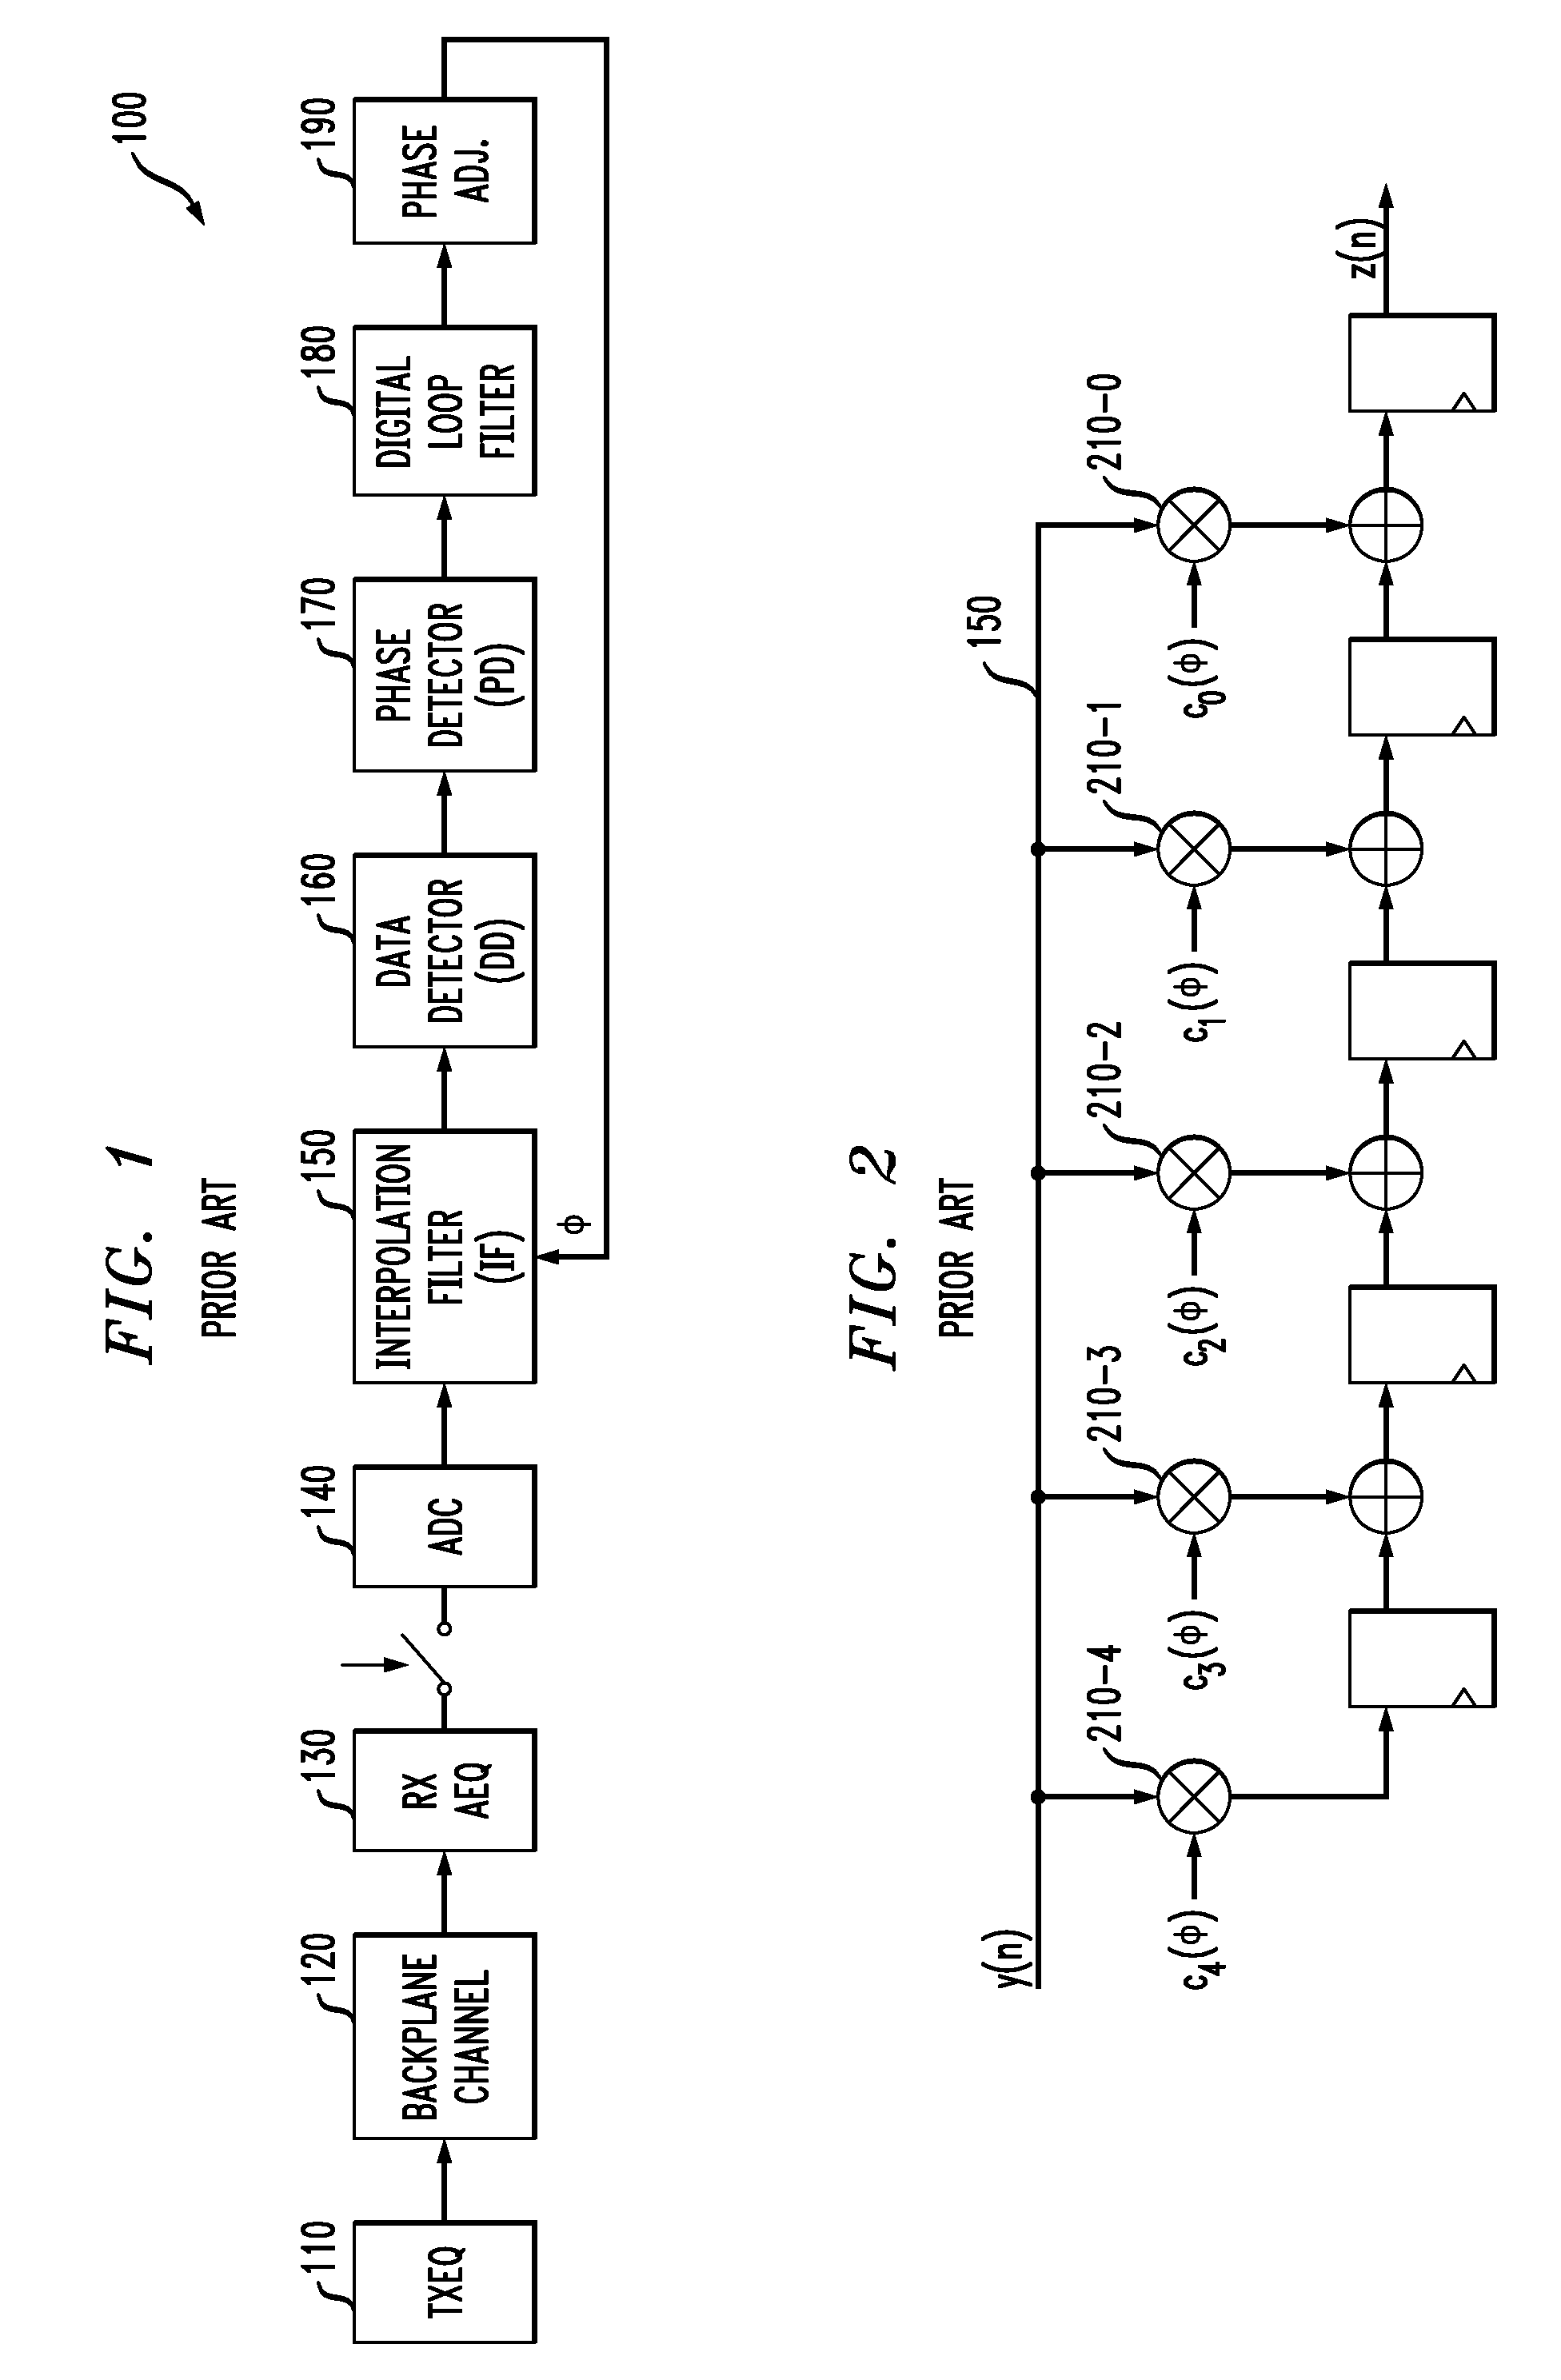 Methods and apparatus for asynchronous sampling of a received signal at a downsampled rate